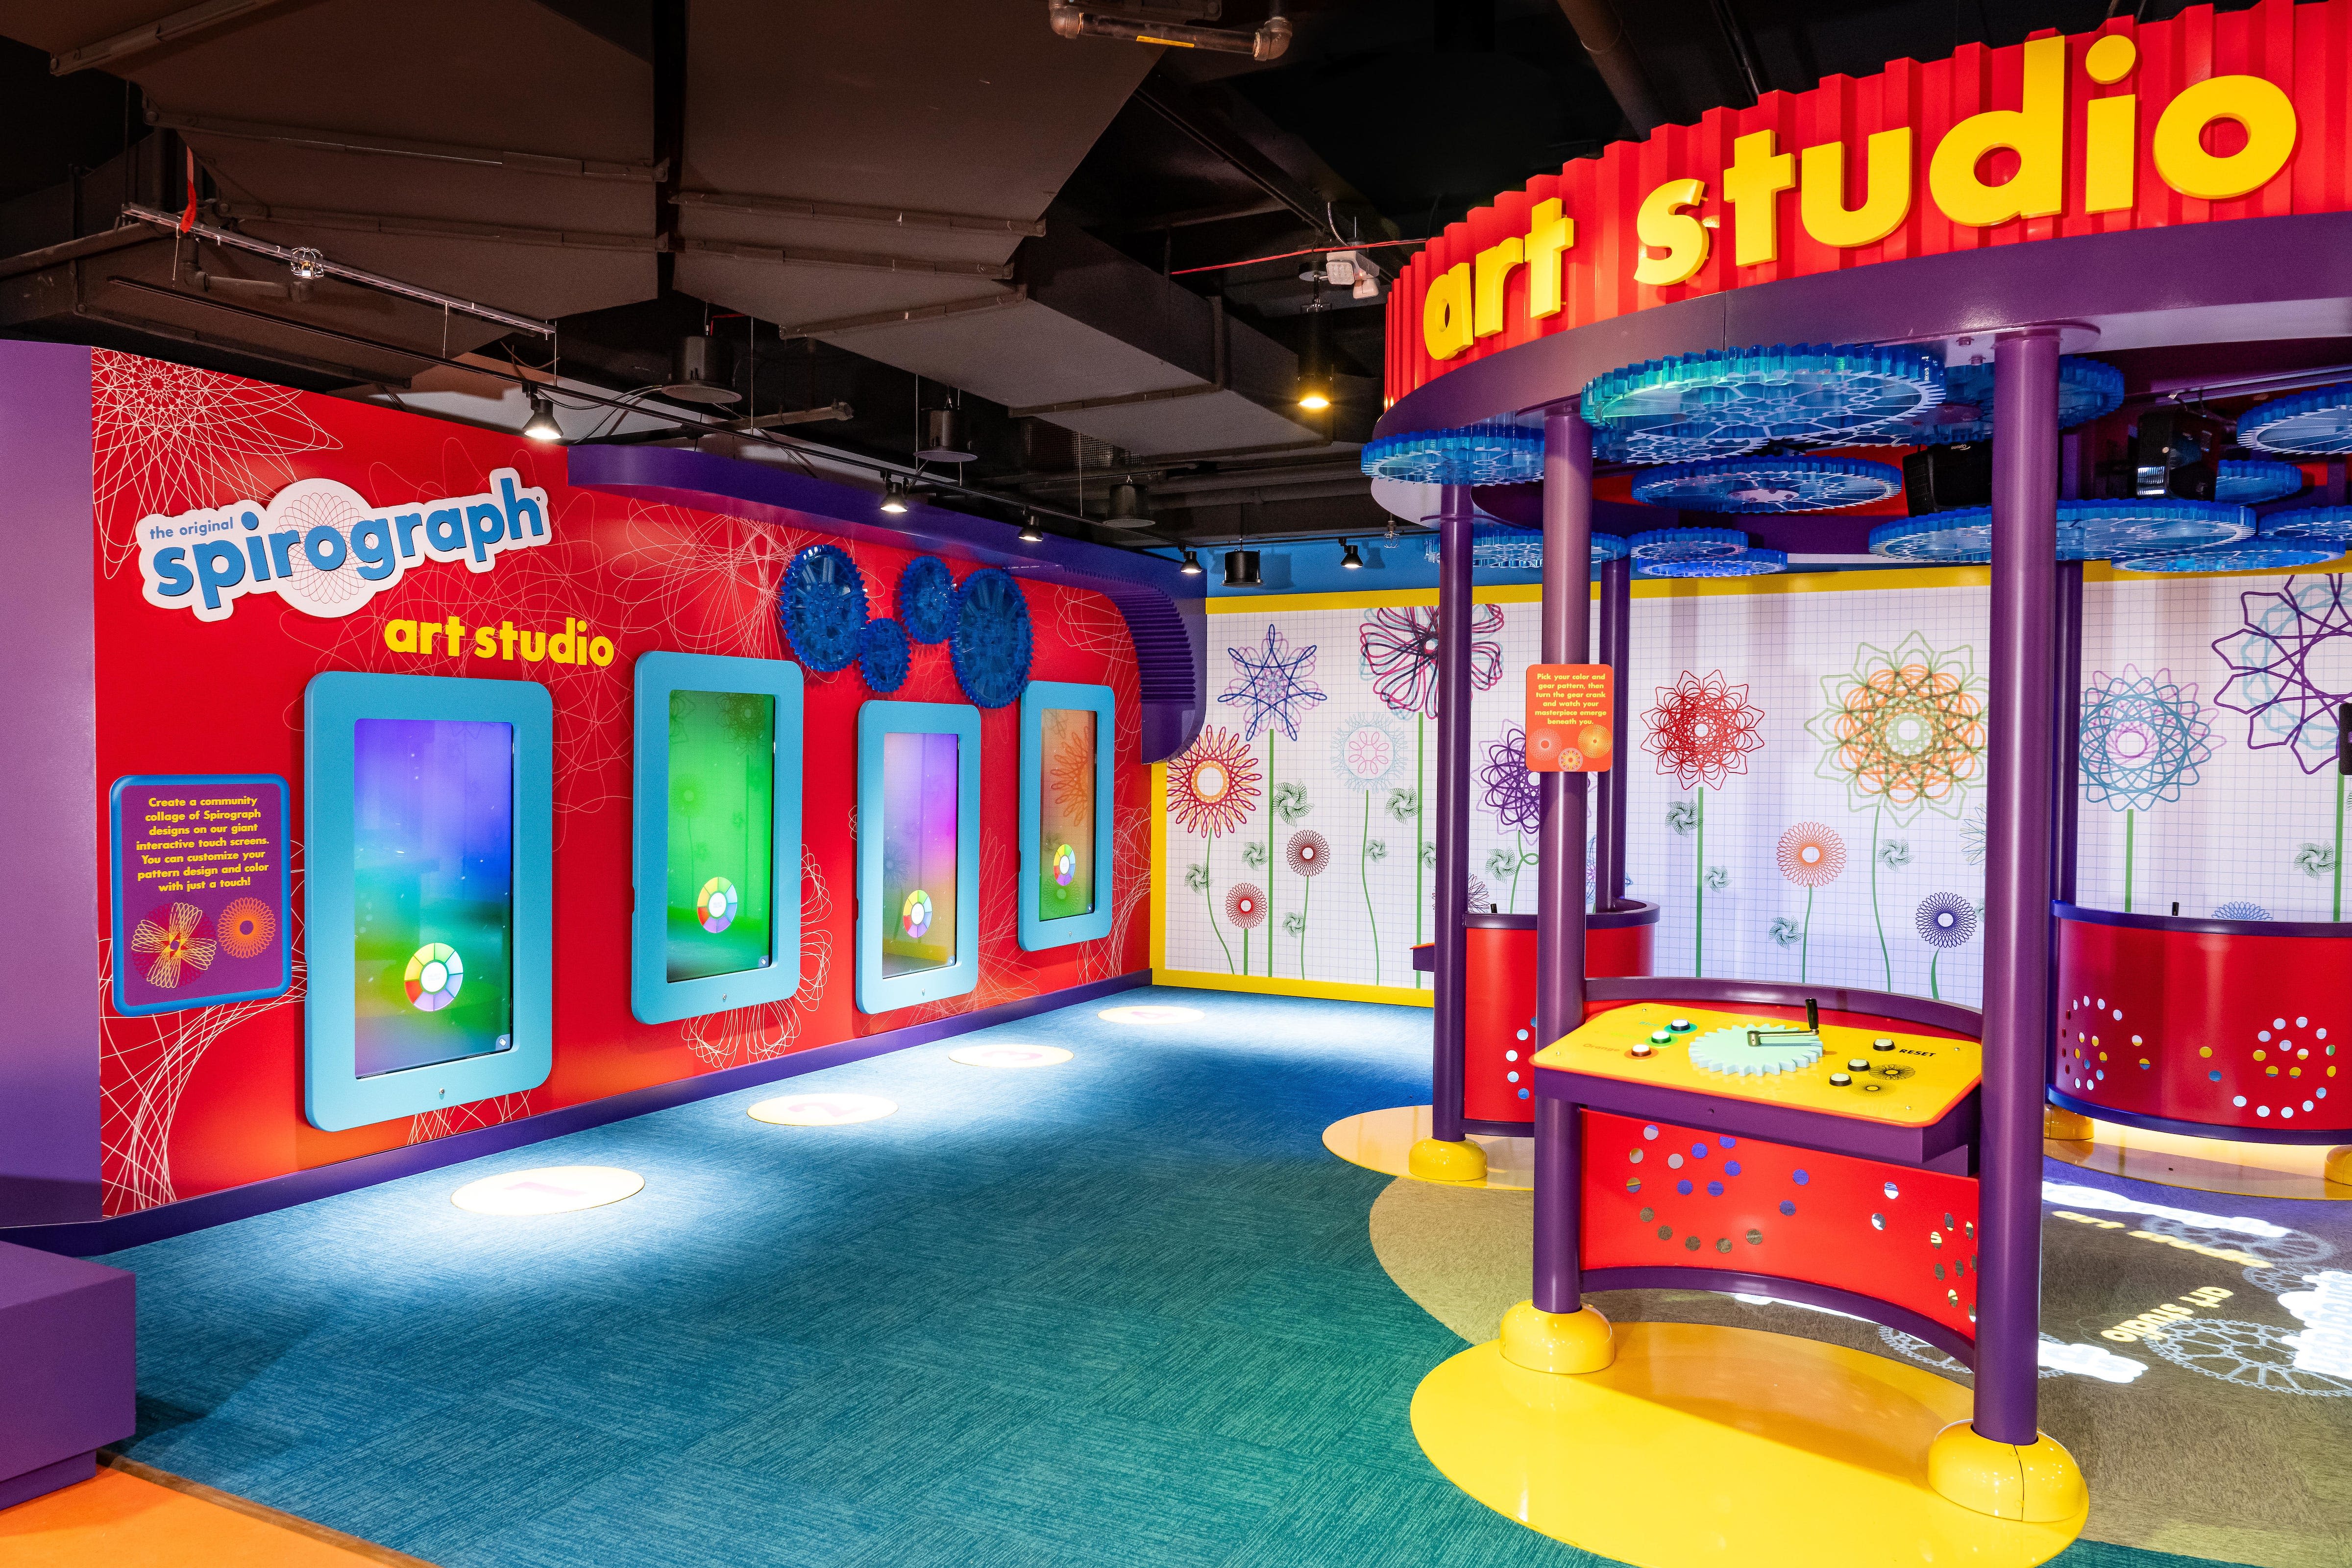 Garden State Plaza opens play center featuring Hasbro's Transformers, Play-Doh, Tinkertoy